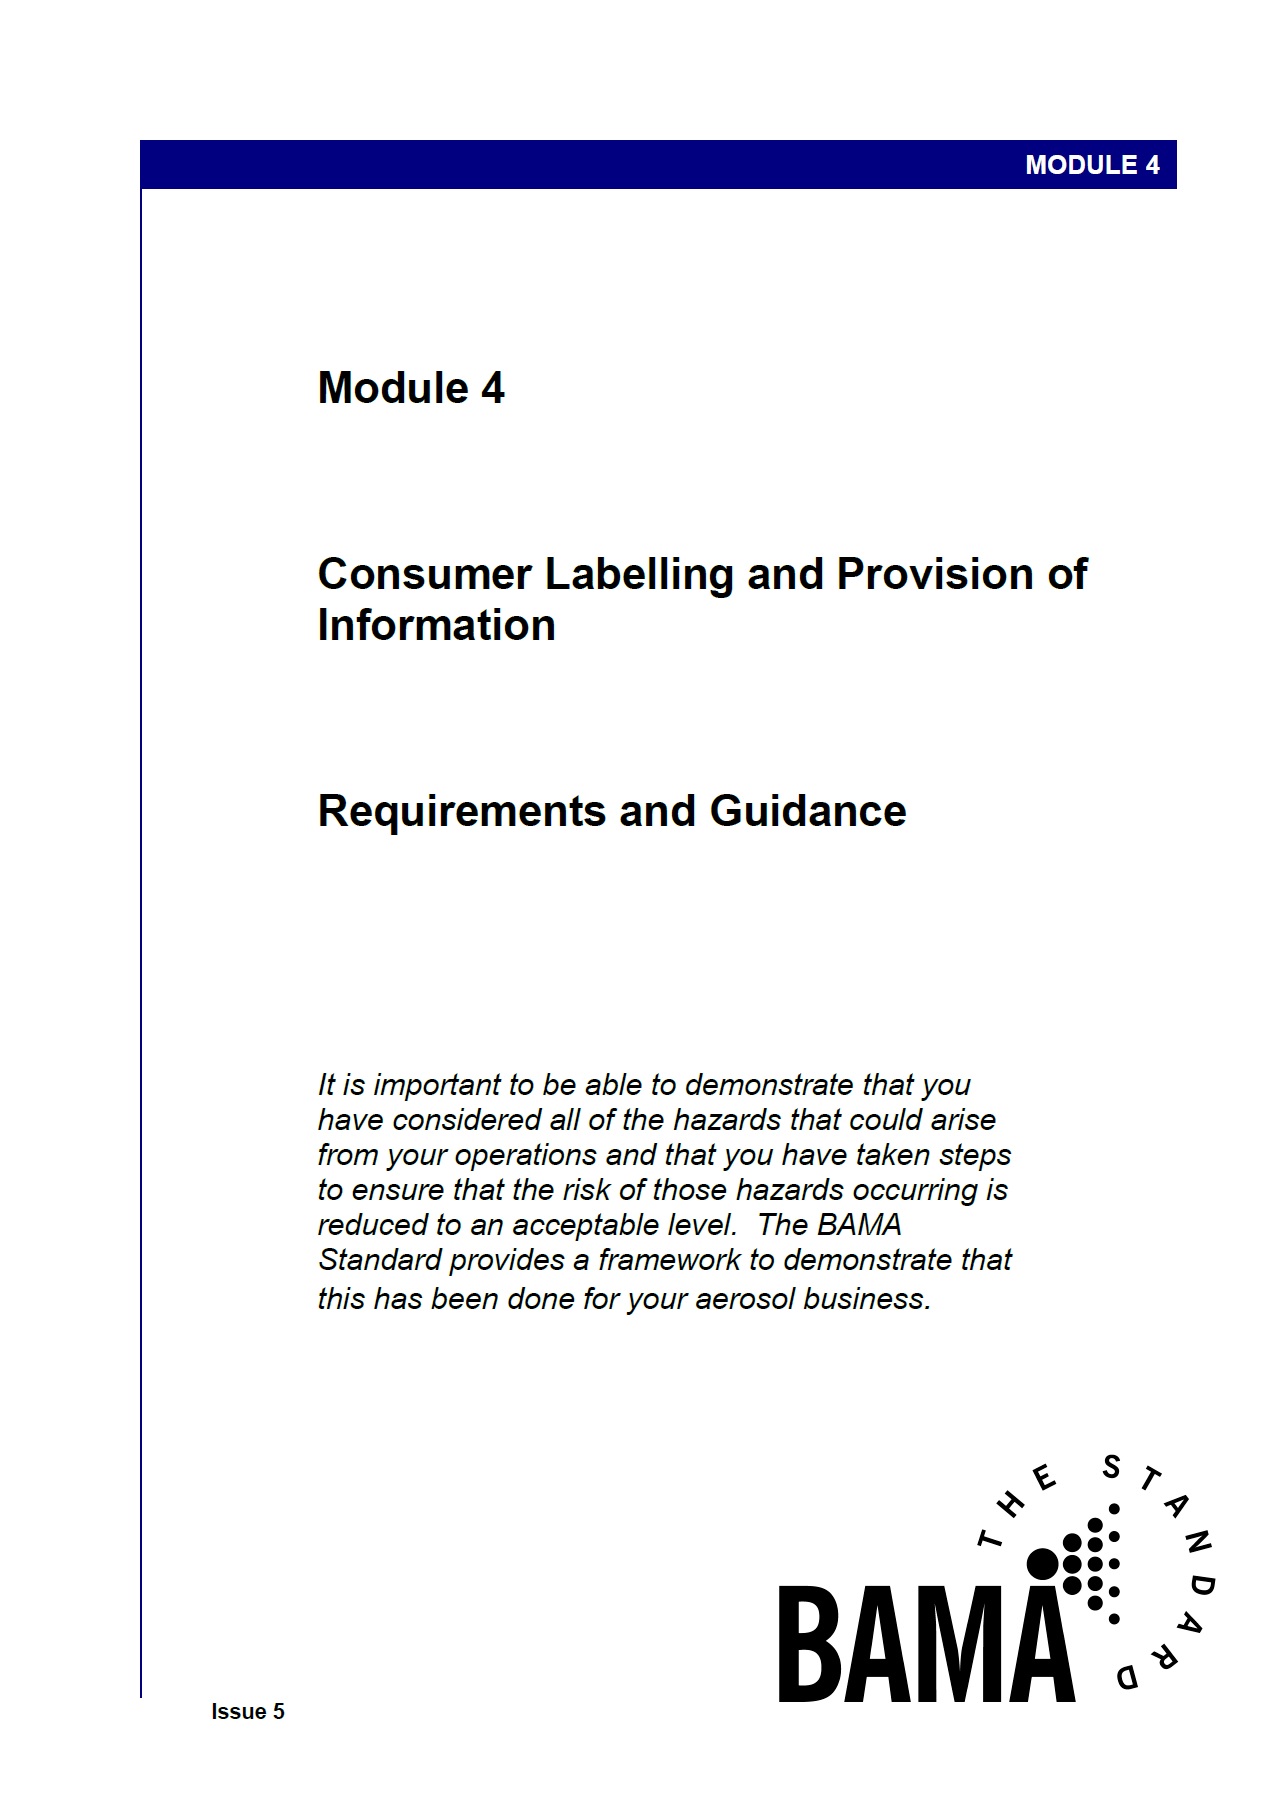 Module 4: Consumer Labelling and Provisions of Information